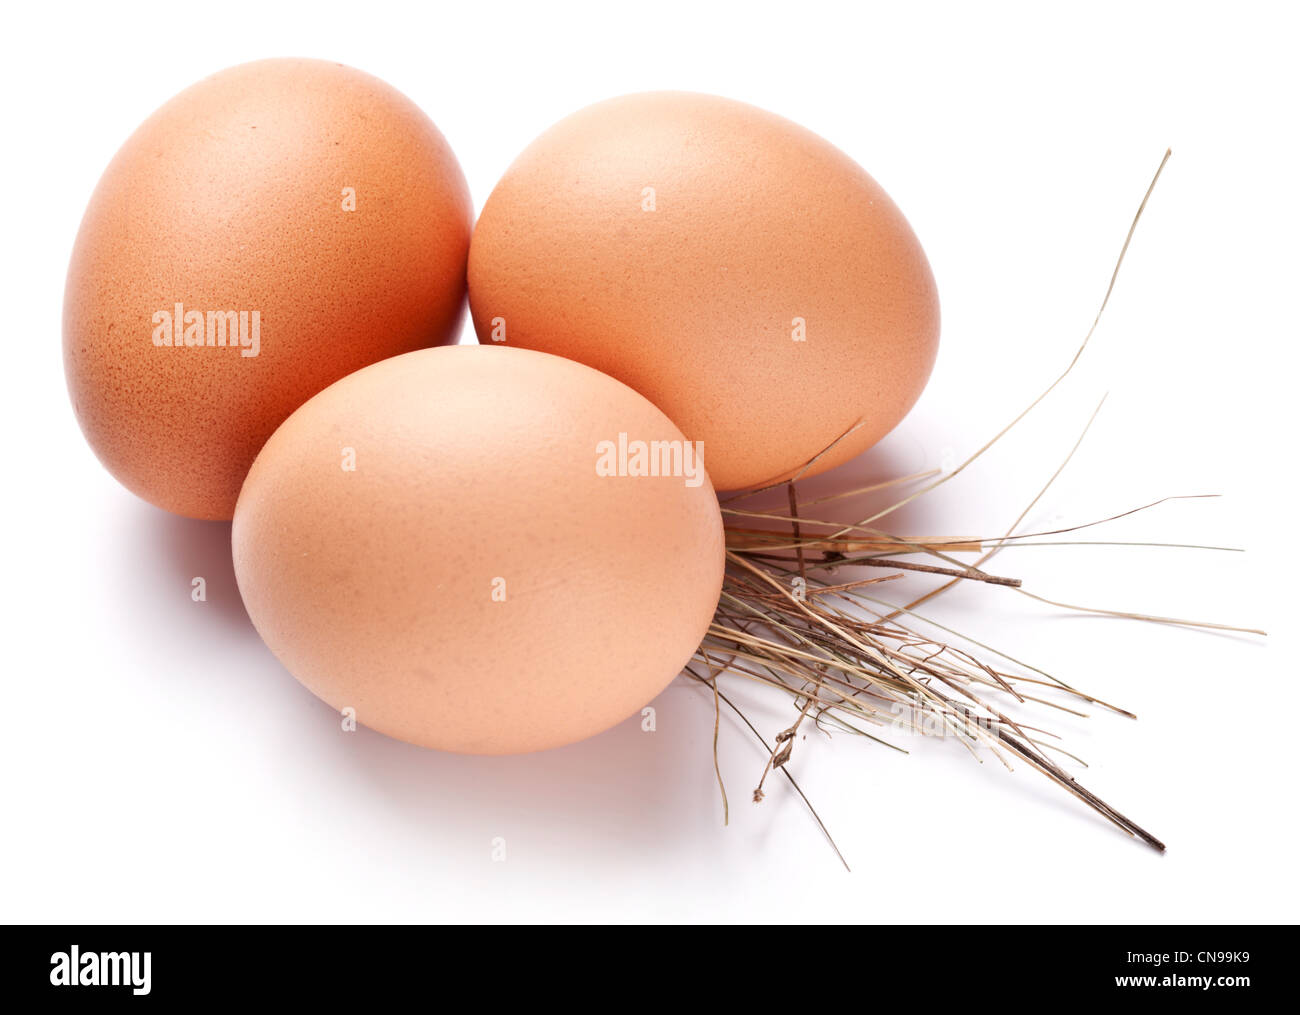 Eggs with a straw on a white background. Stock Photo